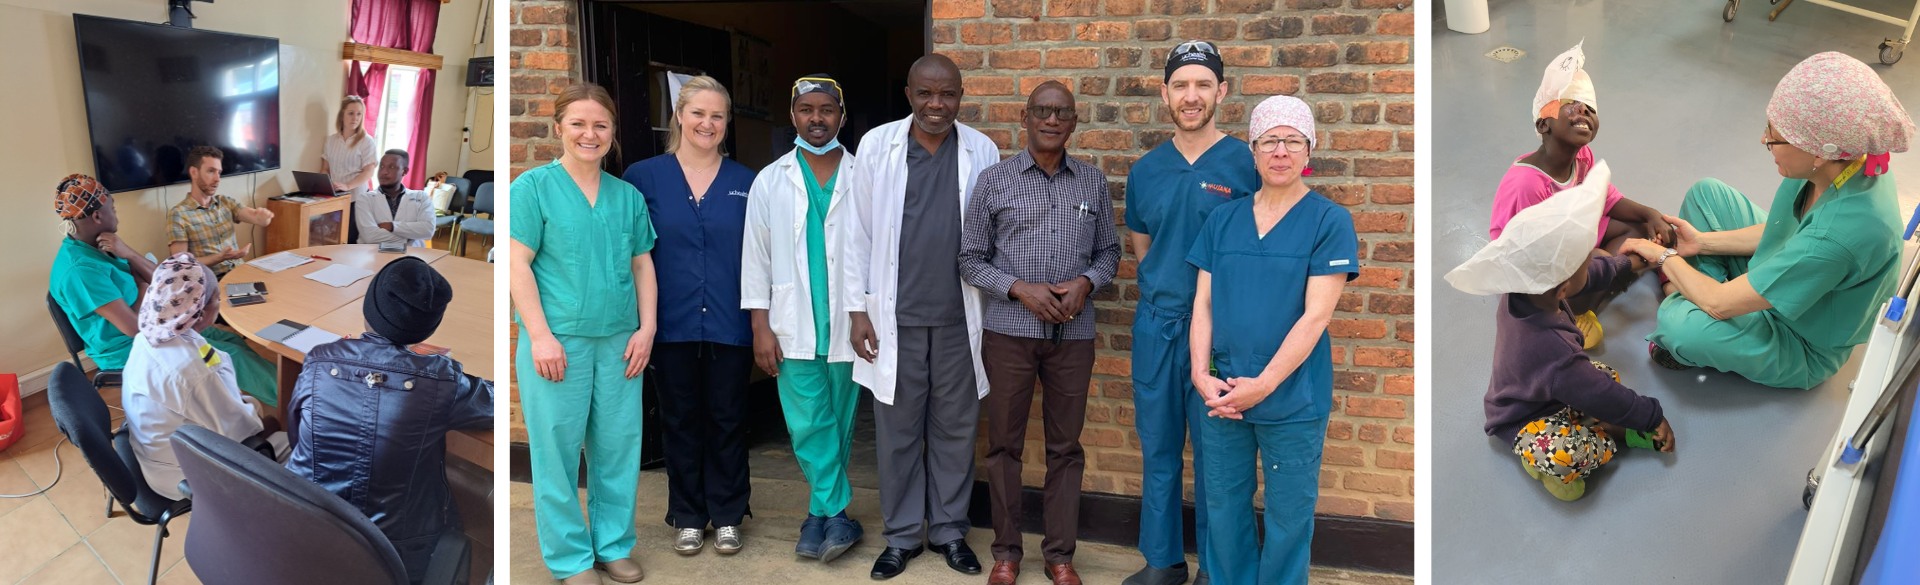 Burn Trip to Uganda and Rwanda Focuses on Building and Strengthening Relationships | Cameron Gibson, MD | University of Colorado Department of Surgery